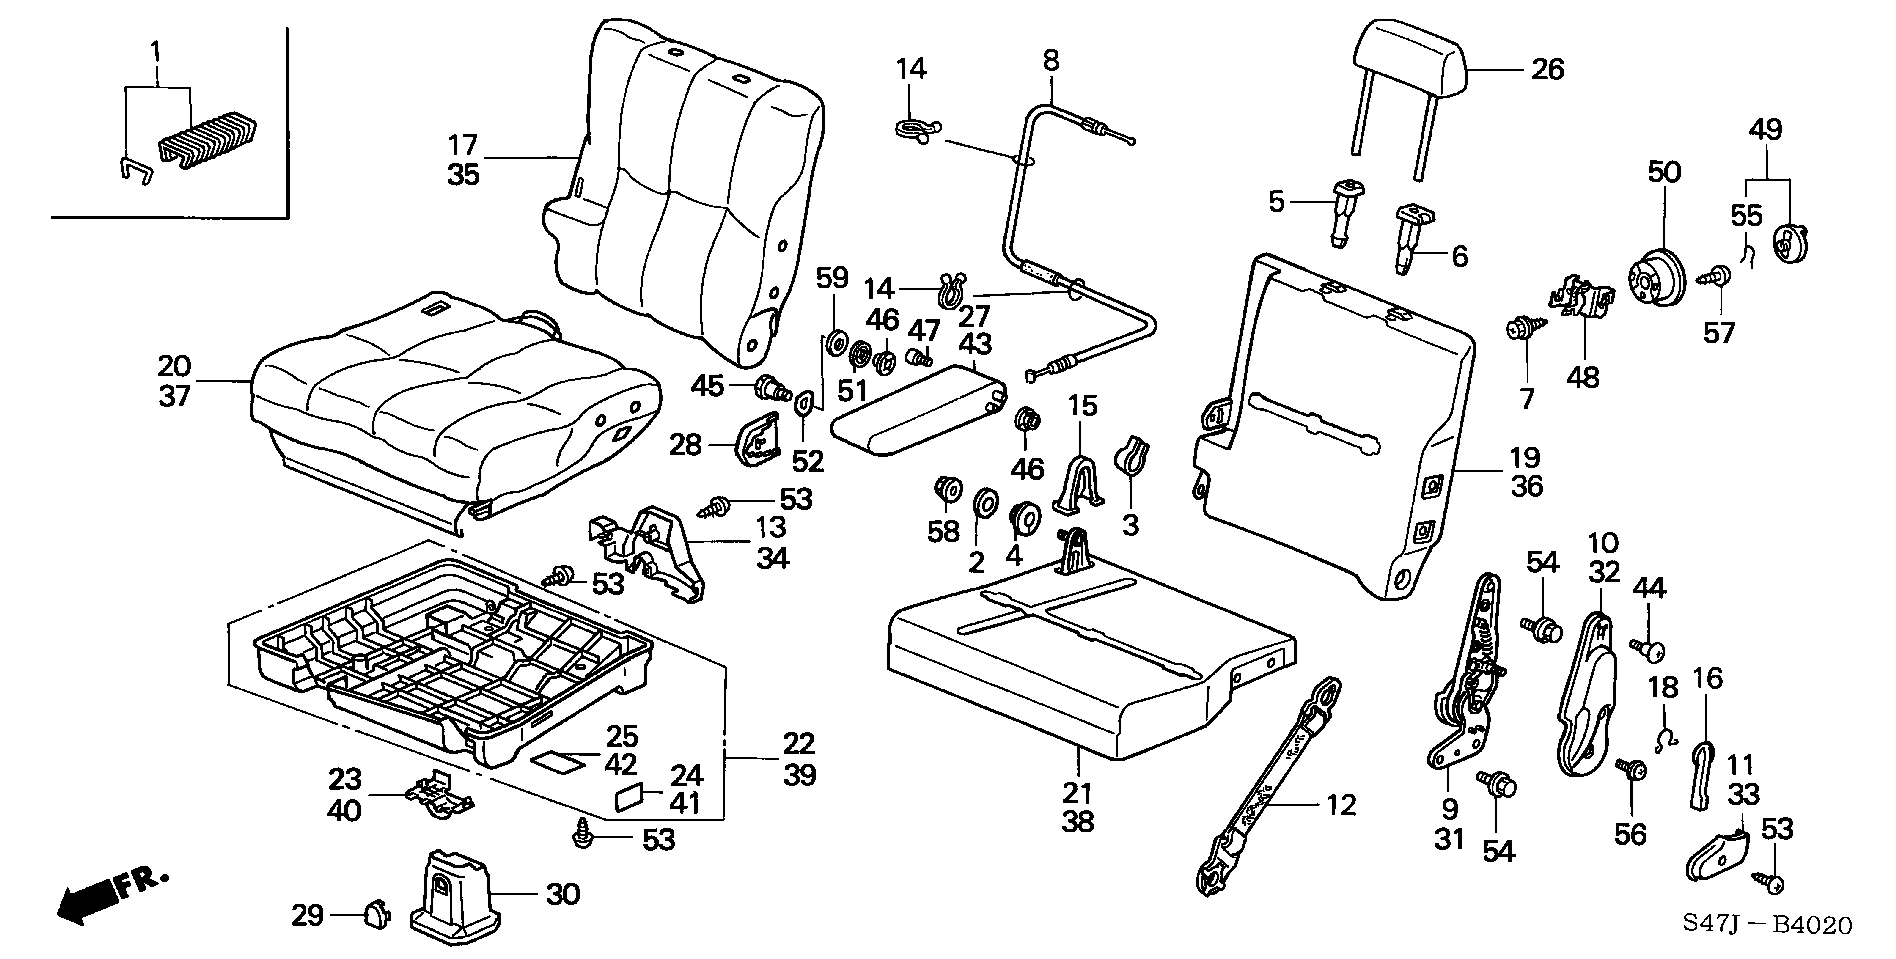 MIDDLE SEAT( POP-UP SEAT)